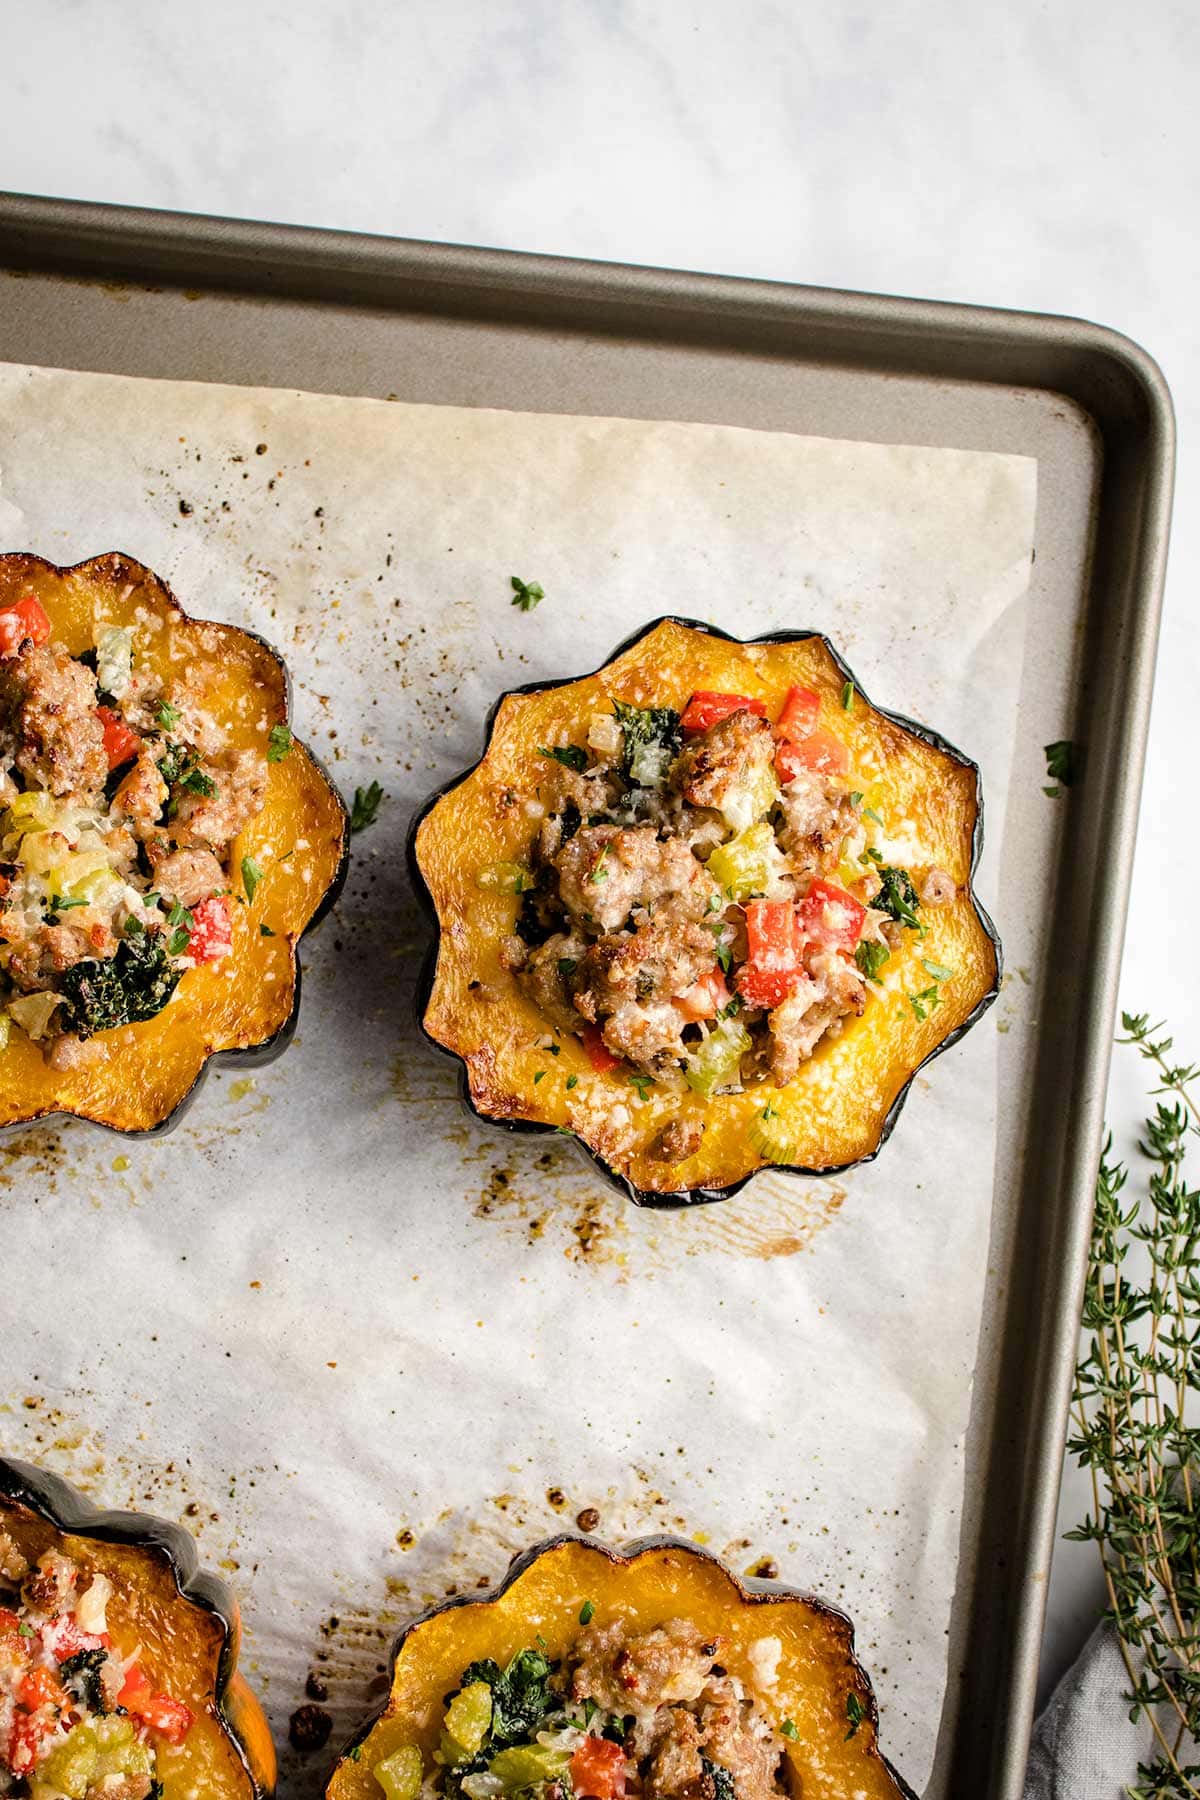 Sausage stuffed acorn squash on a parchment-lined baking tray viewed from overhead.